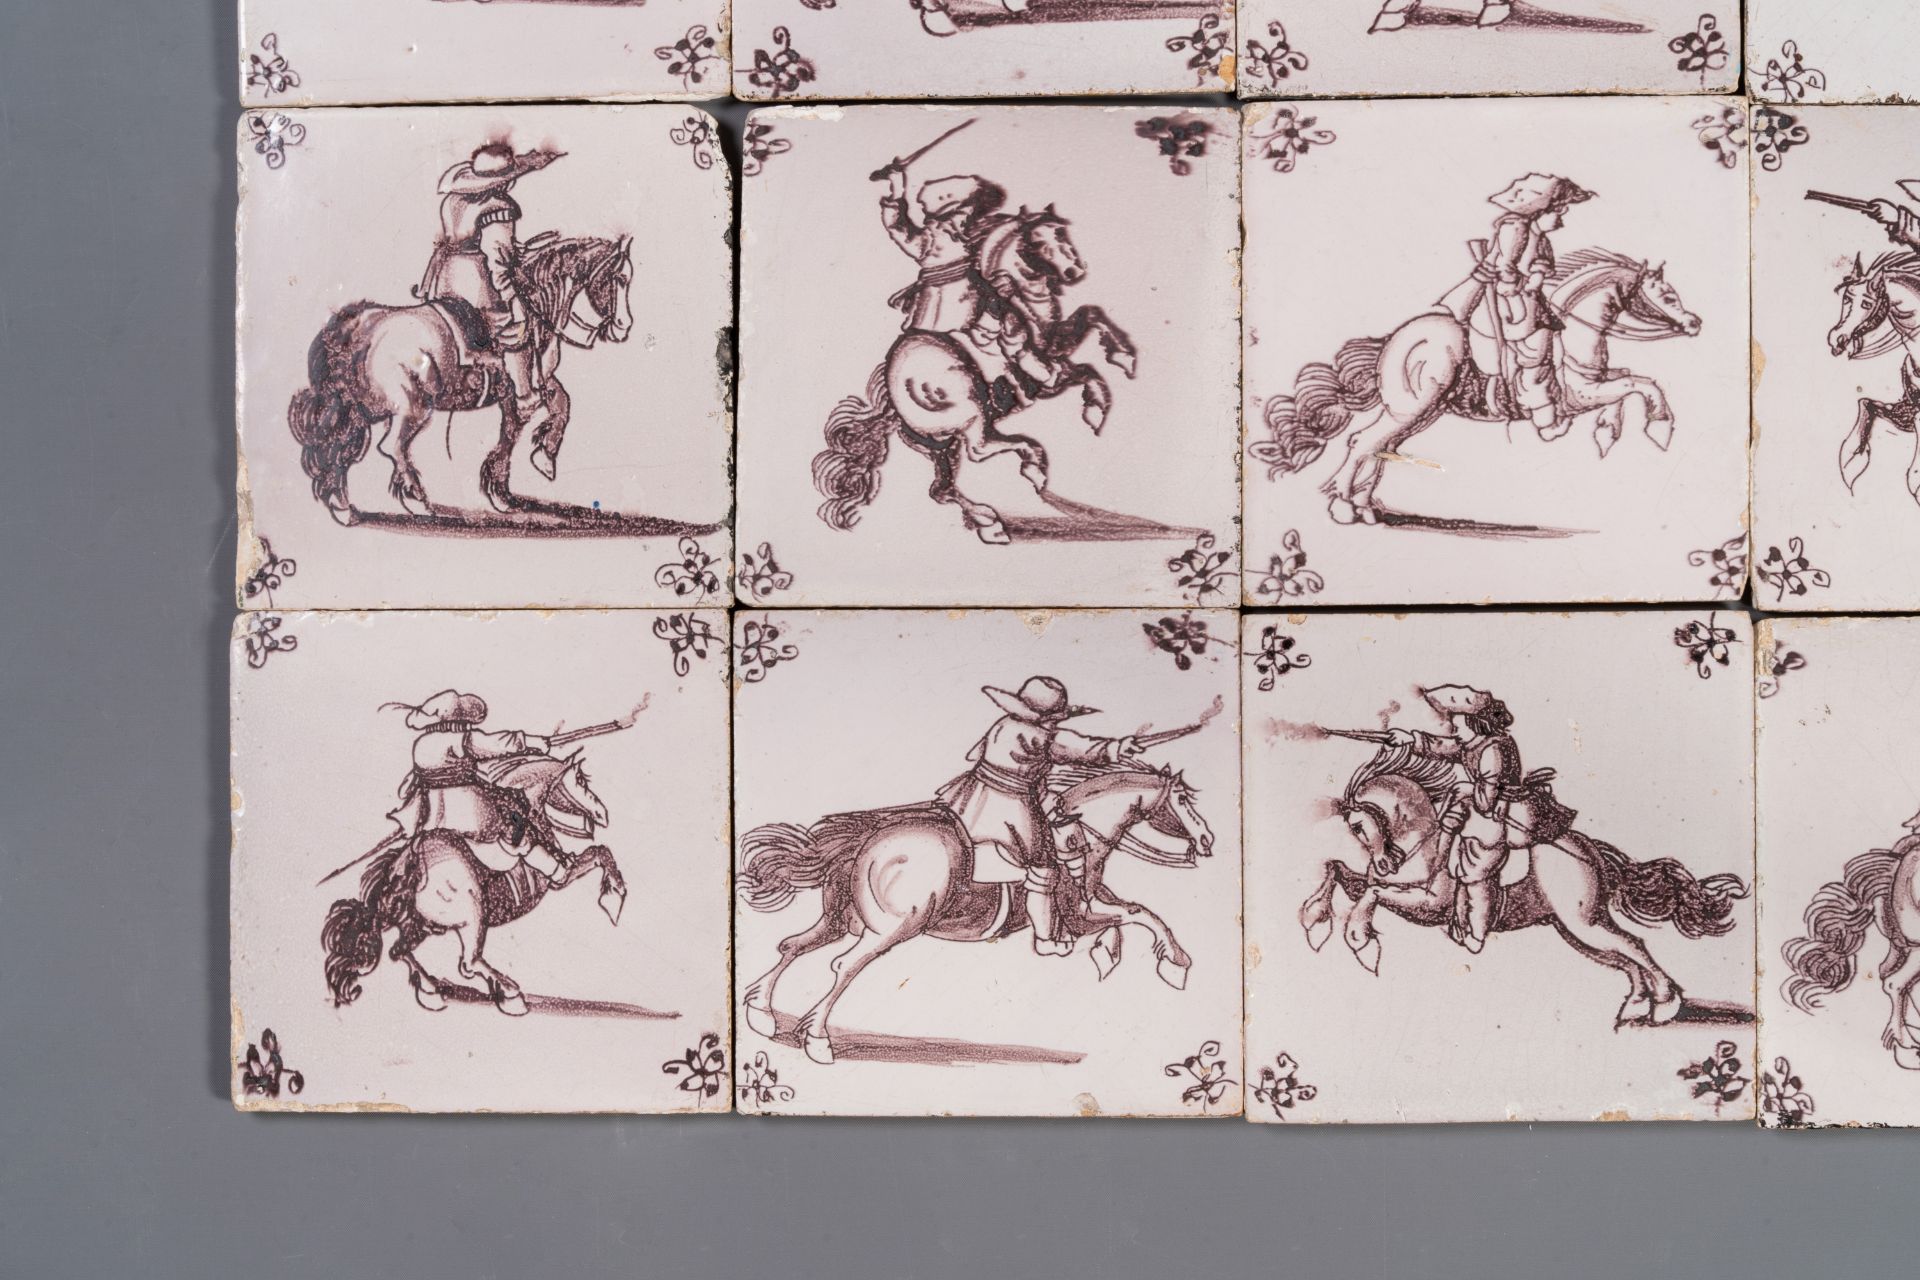 Fifteen Dutch Delft manganese tiles with horse riders, late 17th C. - Image 12 of 13